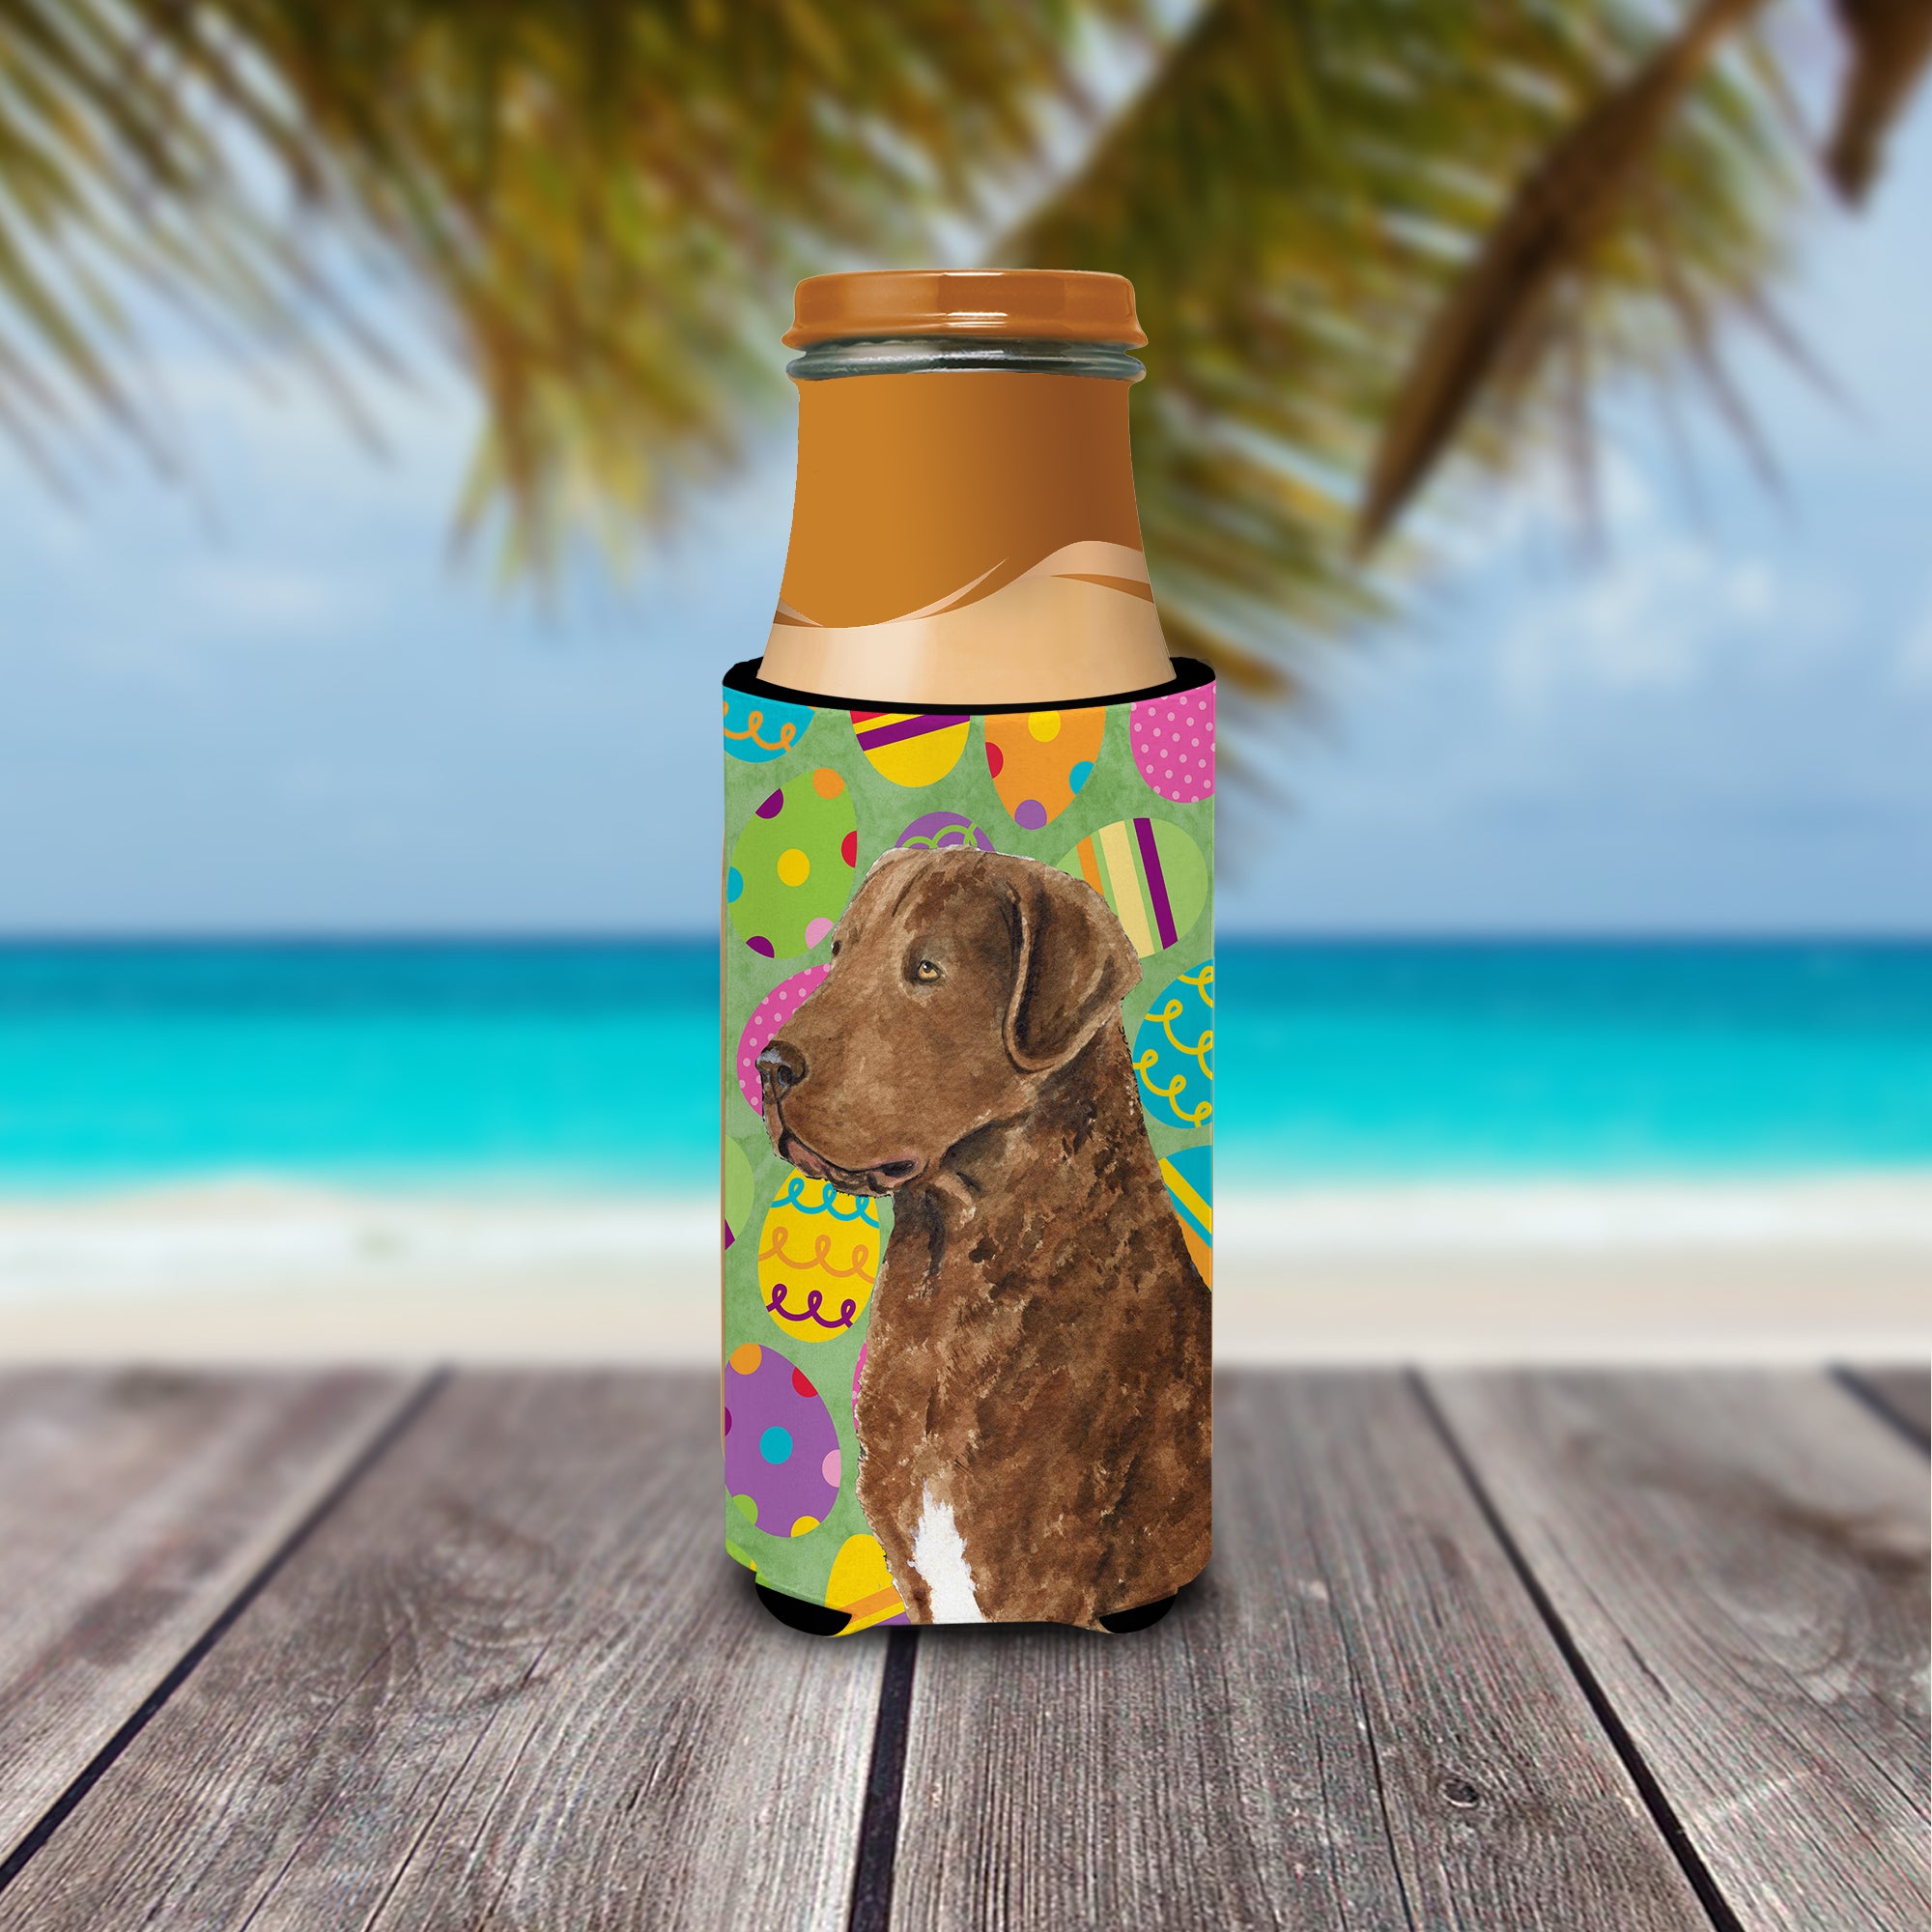 Chesapeake Bay Retriever Easter Eggtravaganza Ultra Beverage Insulators for slim cans SS4876MUK